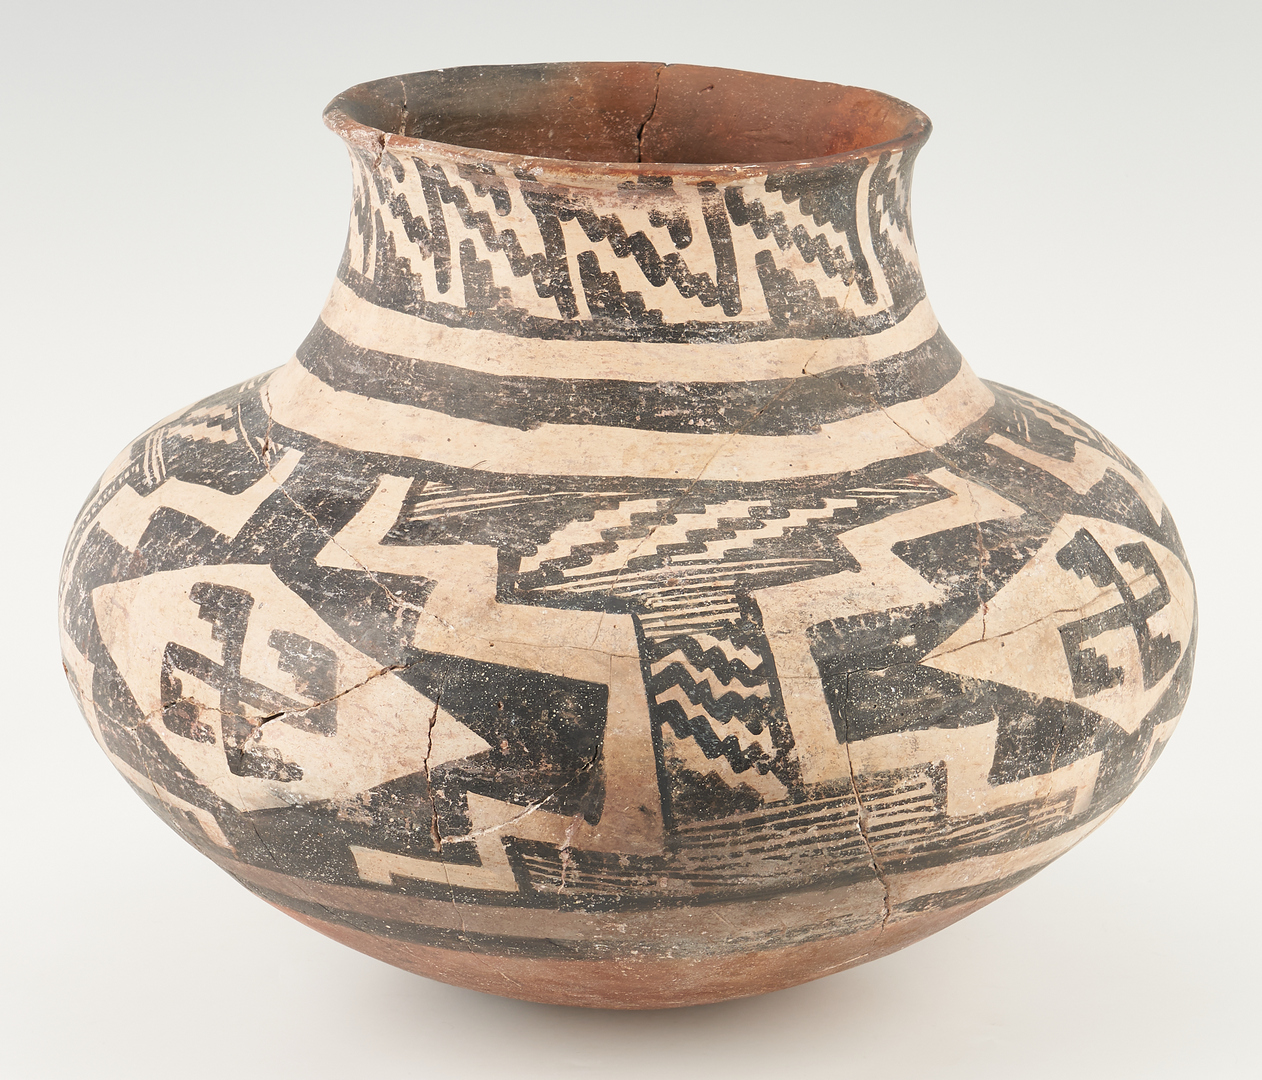 Lot 685: Large Early Anasazi Pottery Olla, Black & White on Red